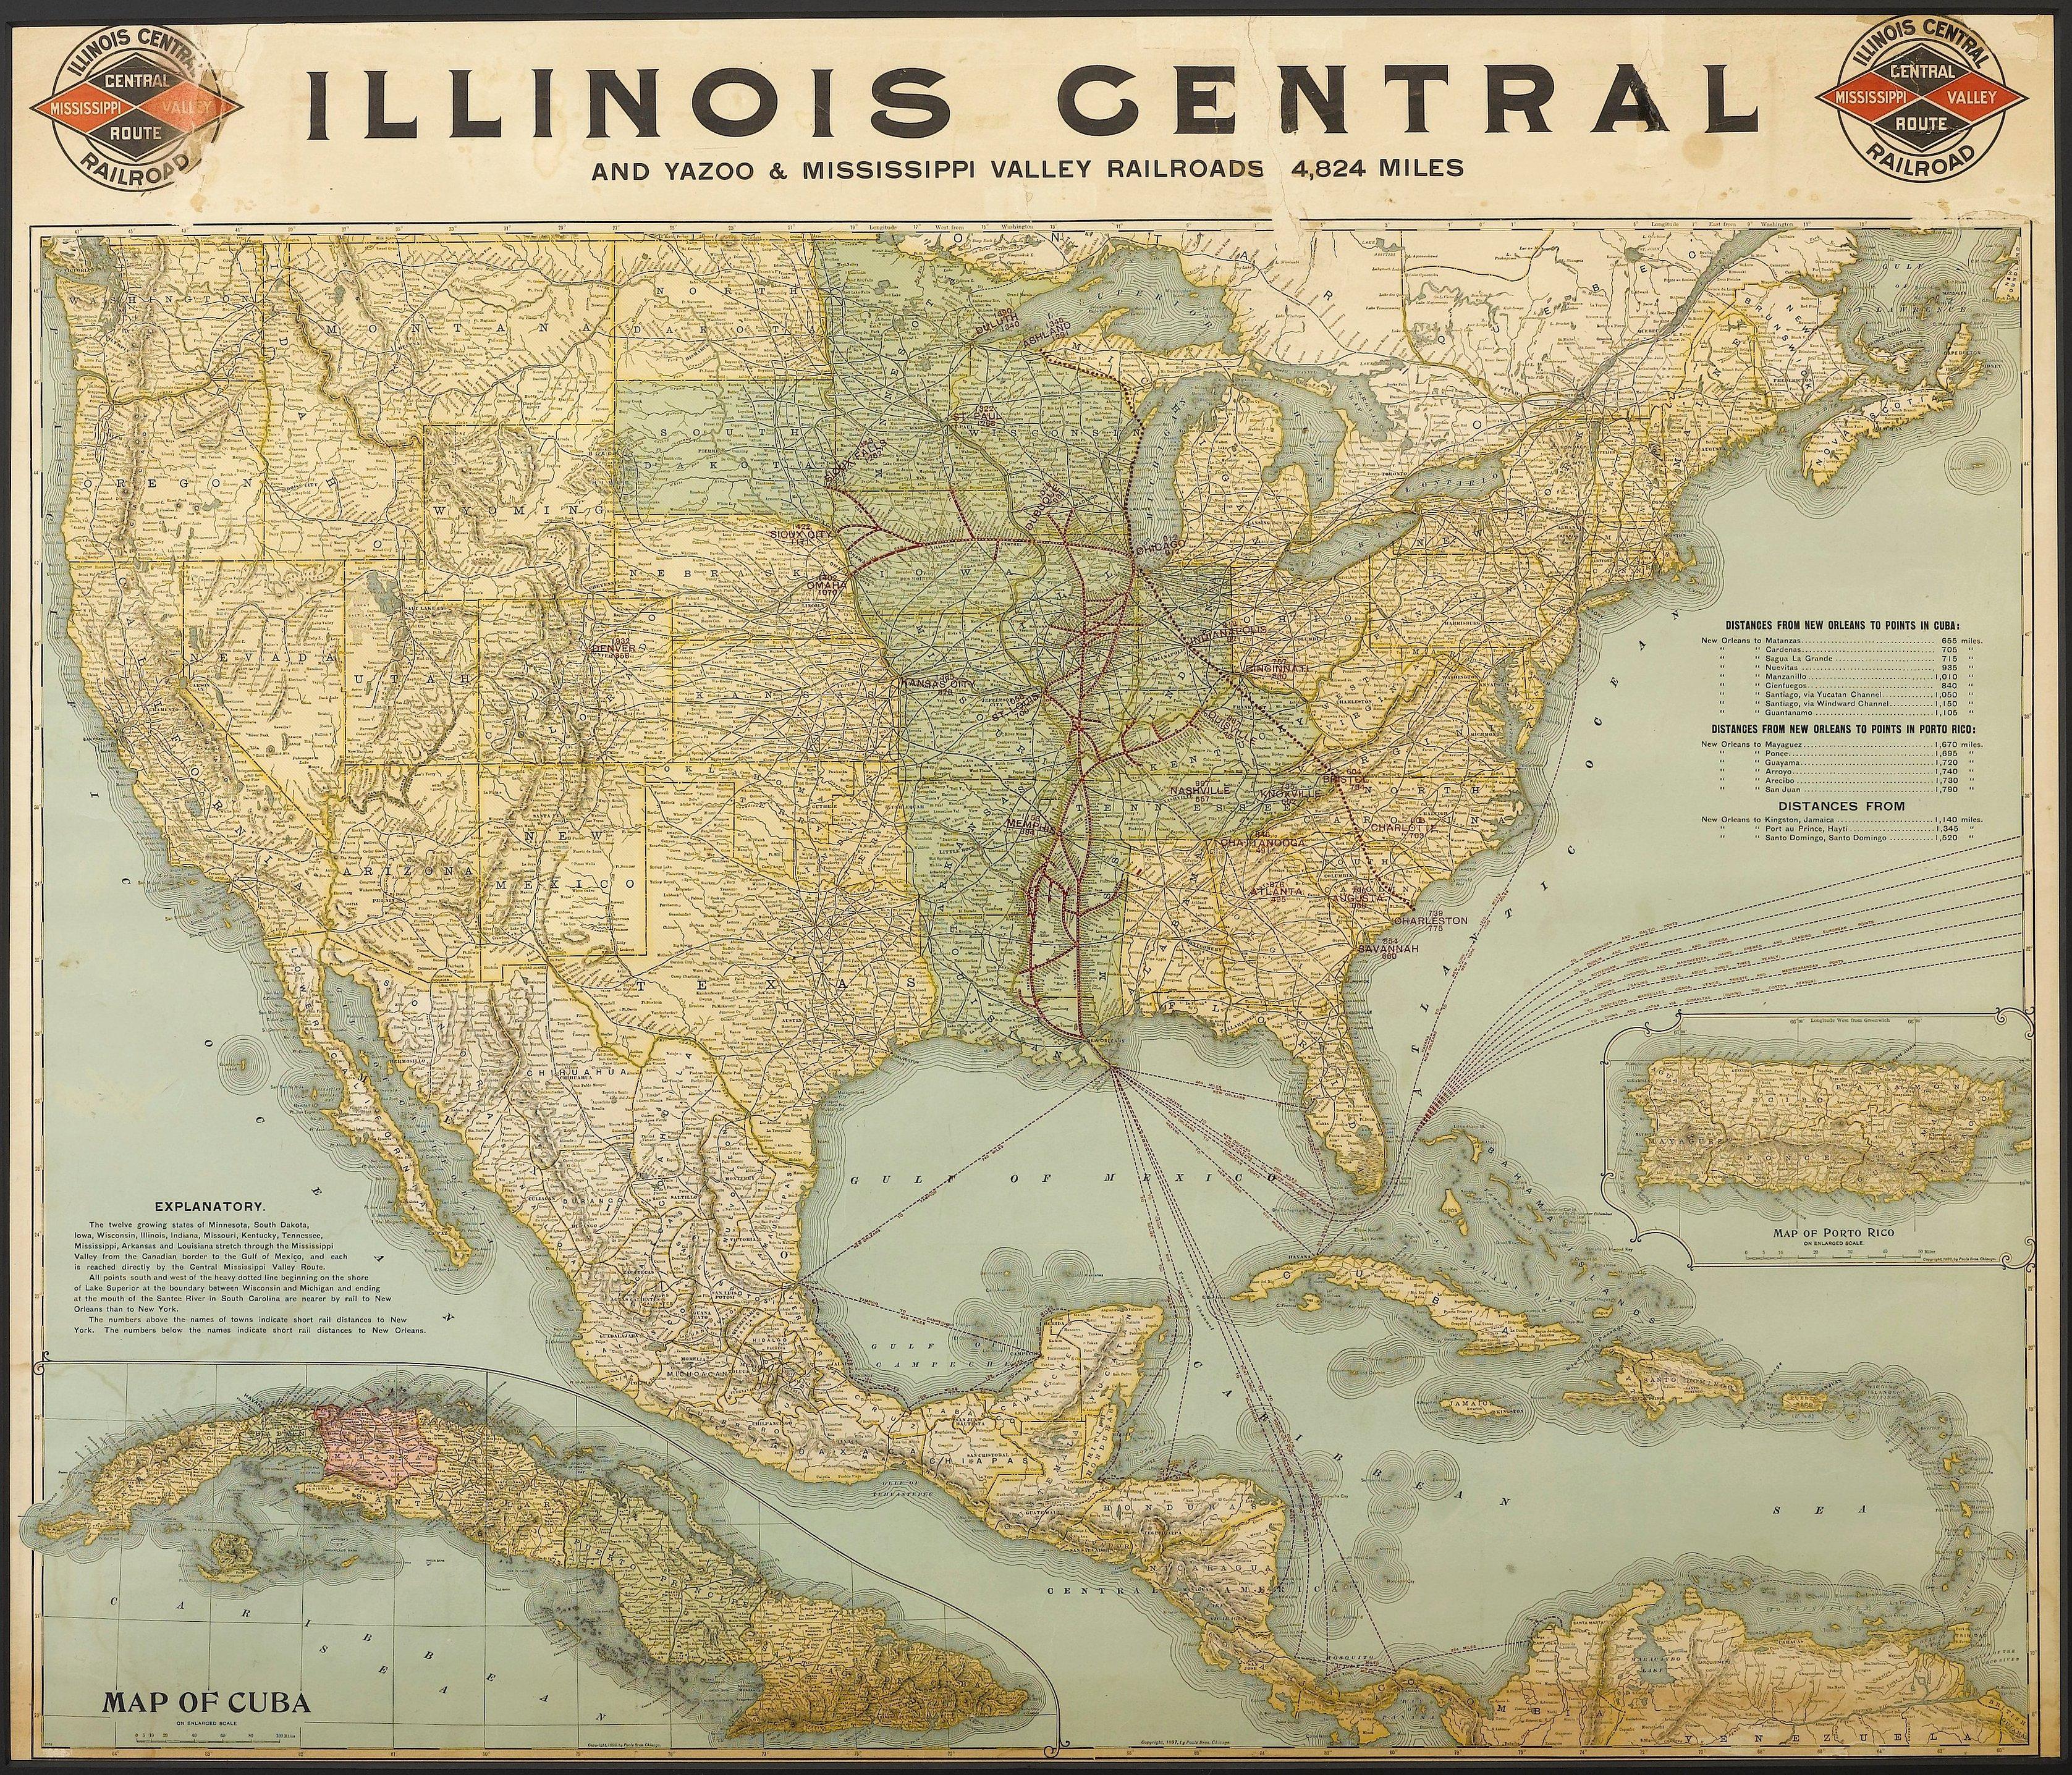 This is an 1899 railroad map of the Illinois Central and Yazoo and Mississippi Valley Railroads, published by the Poole Brothers. The map focuses on the continuous United States from the Atlantic to the Pacific Oceans, the Gulf of Mexico, and the